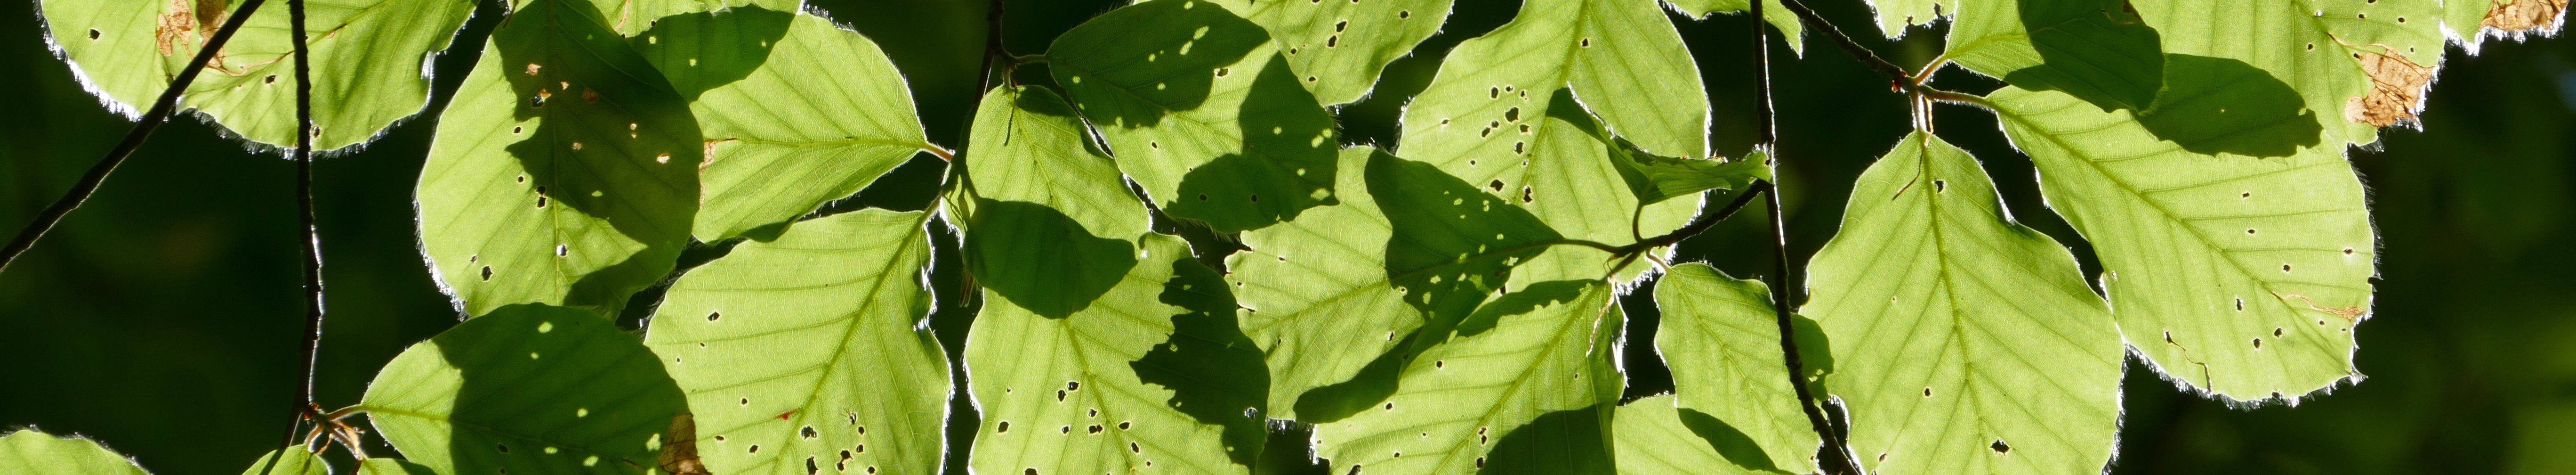 Beech foliage used to monitor the impact of a waste incinerator plant